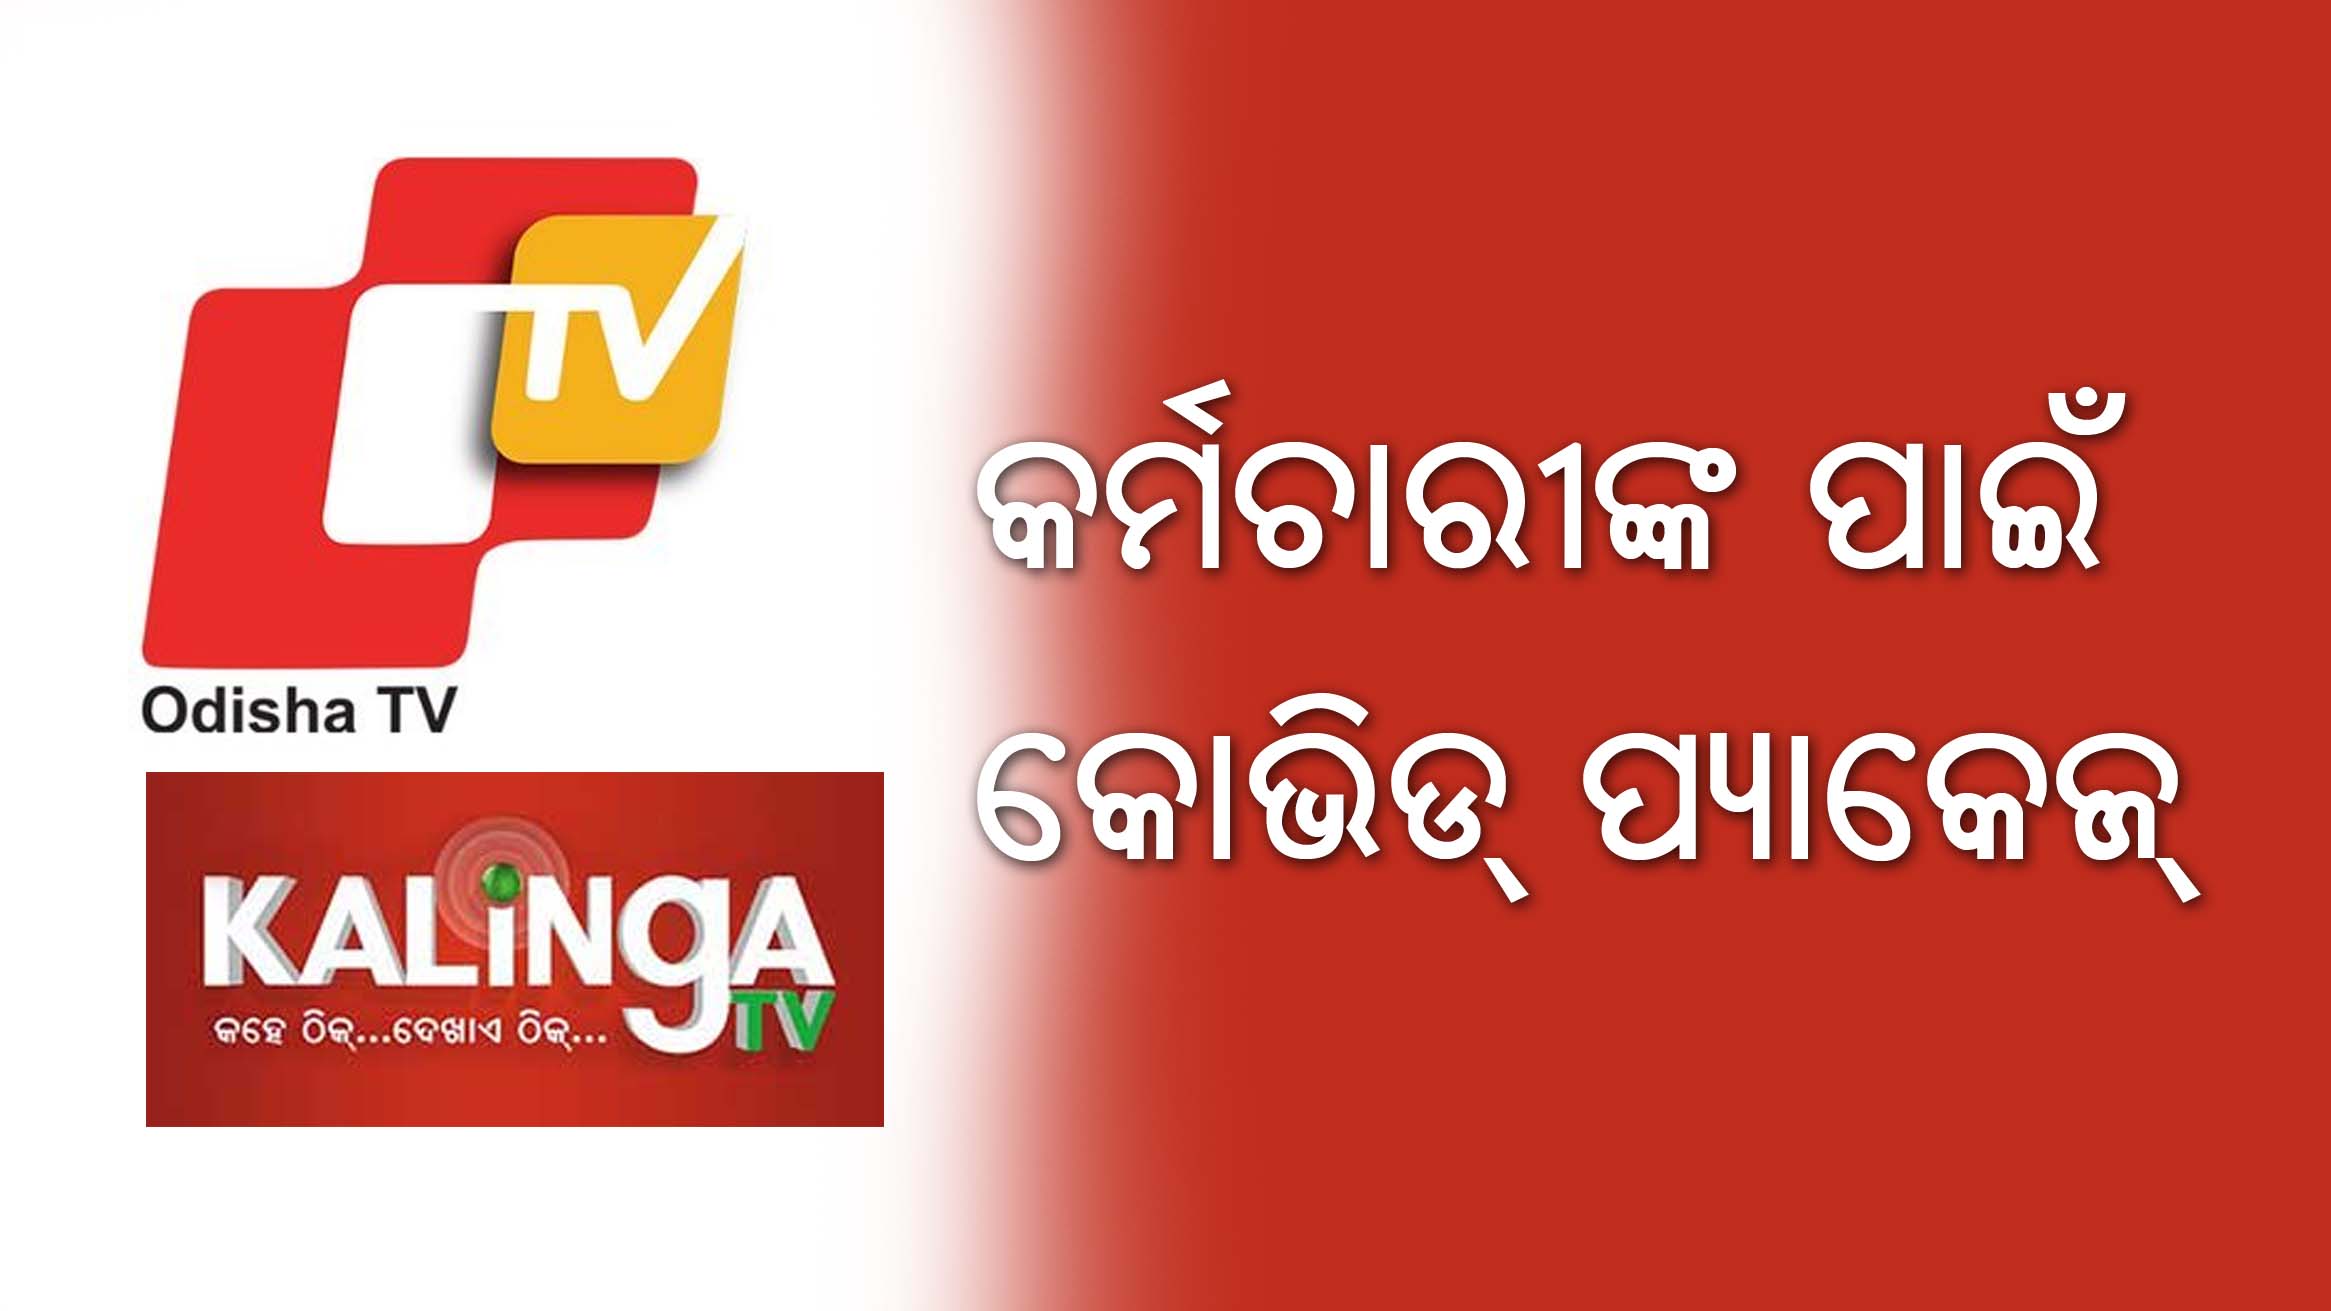 OTV and Kalinga TV announce special COVID package for employees